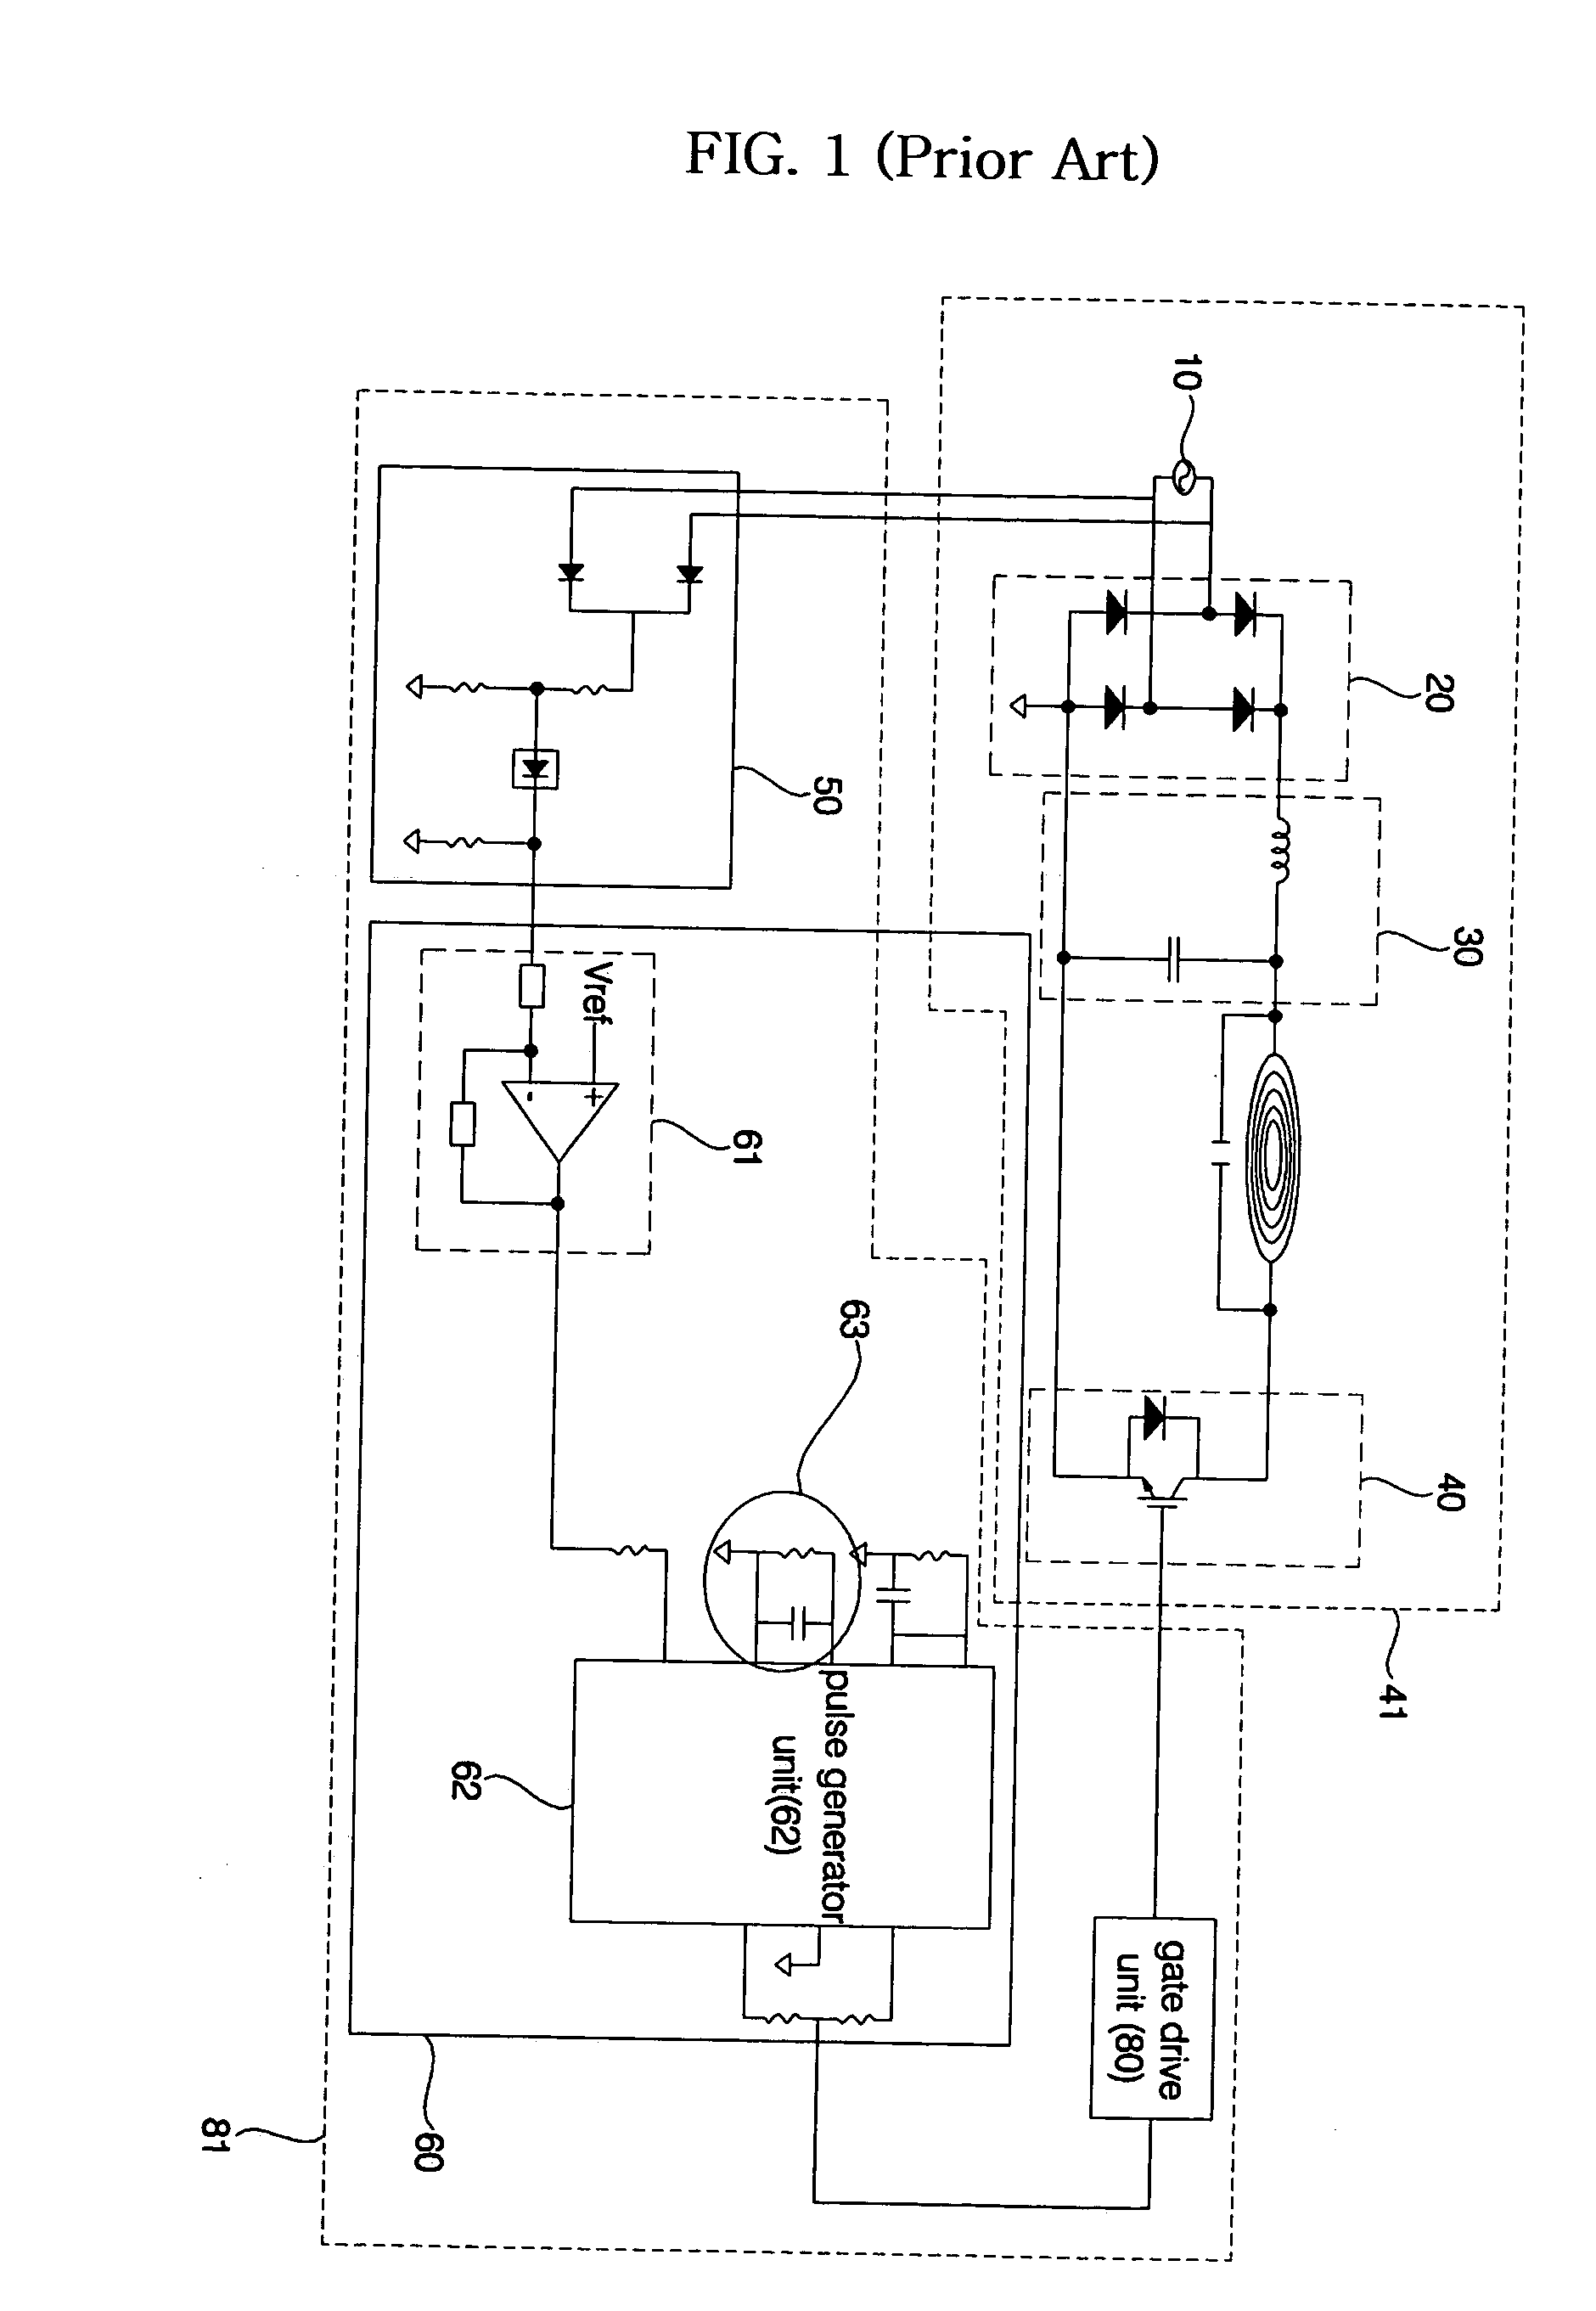 Apparatus for controlling inverter circuit of induction heat cooker